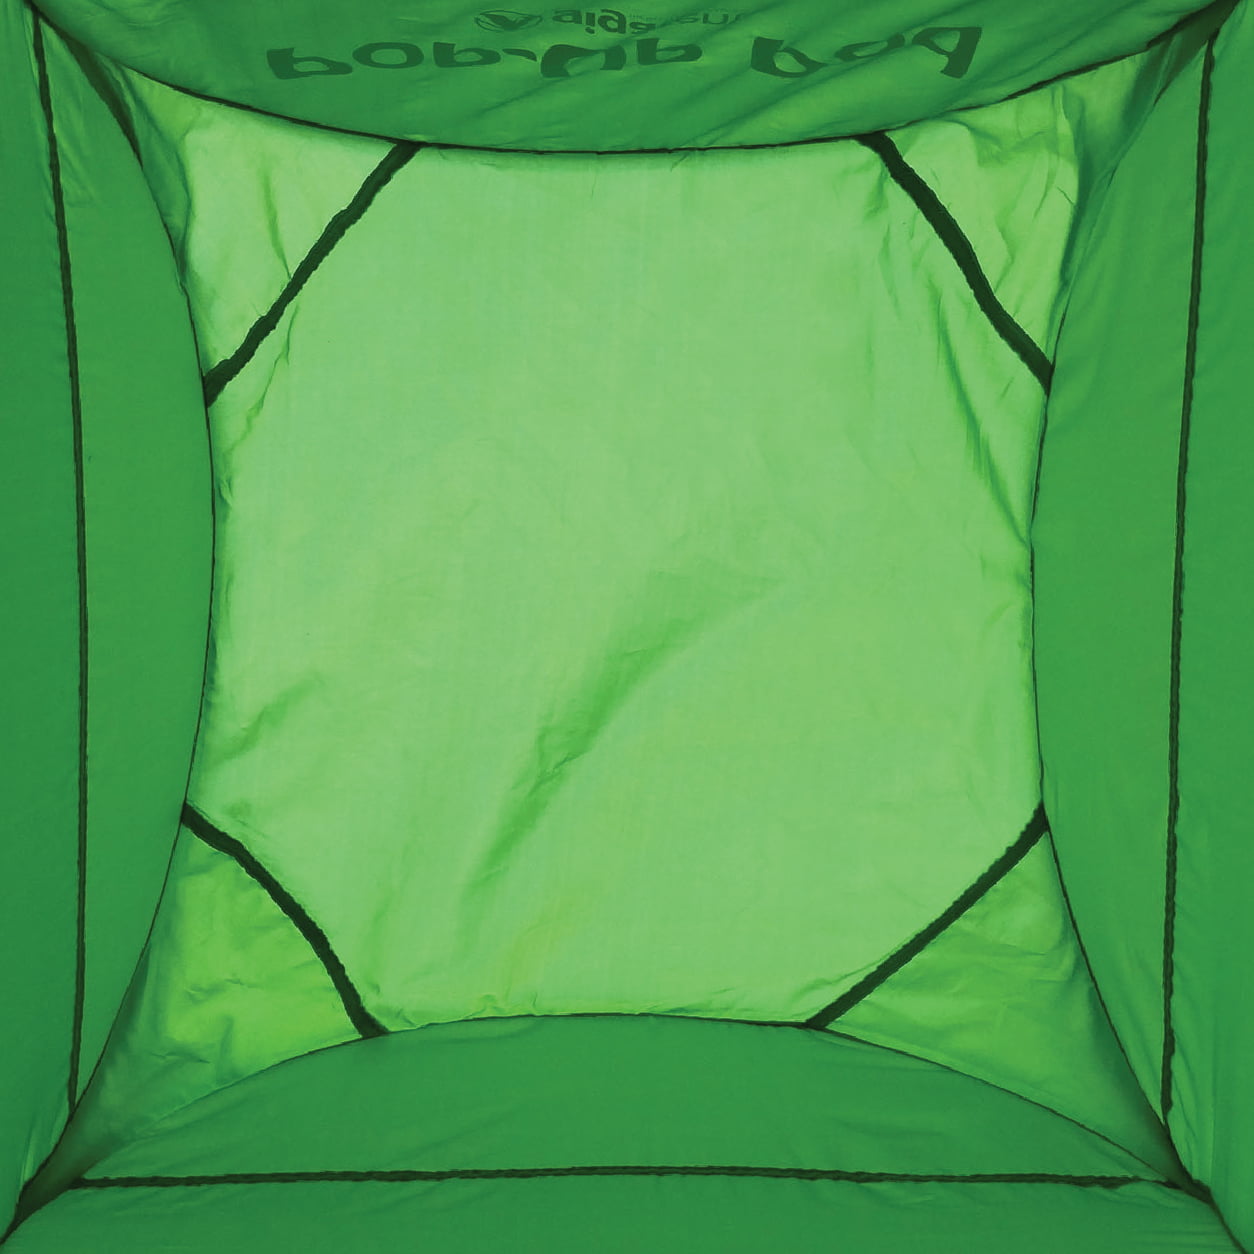 1-Person Pop Up Privacy Tent for Camping Changing Room, Portable Shower Station (Green)